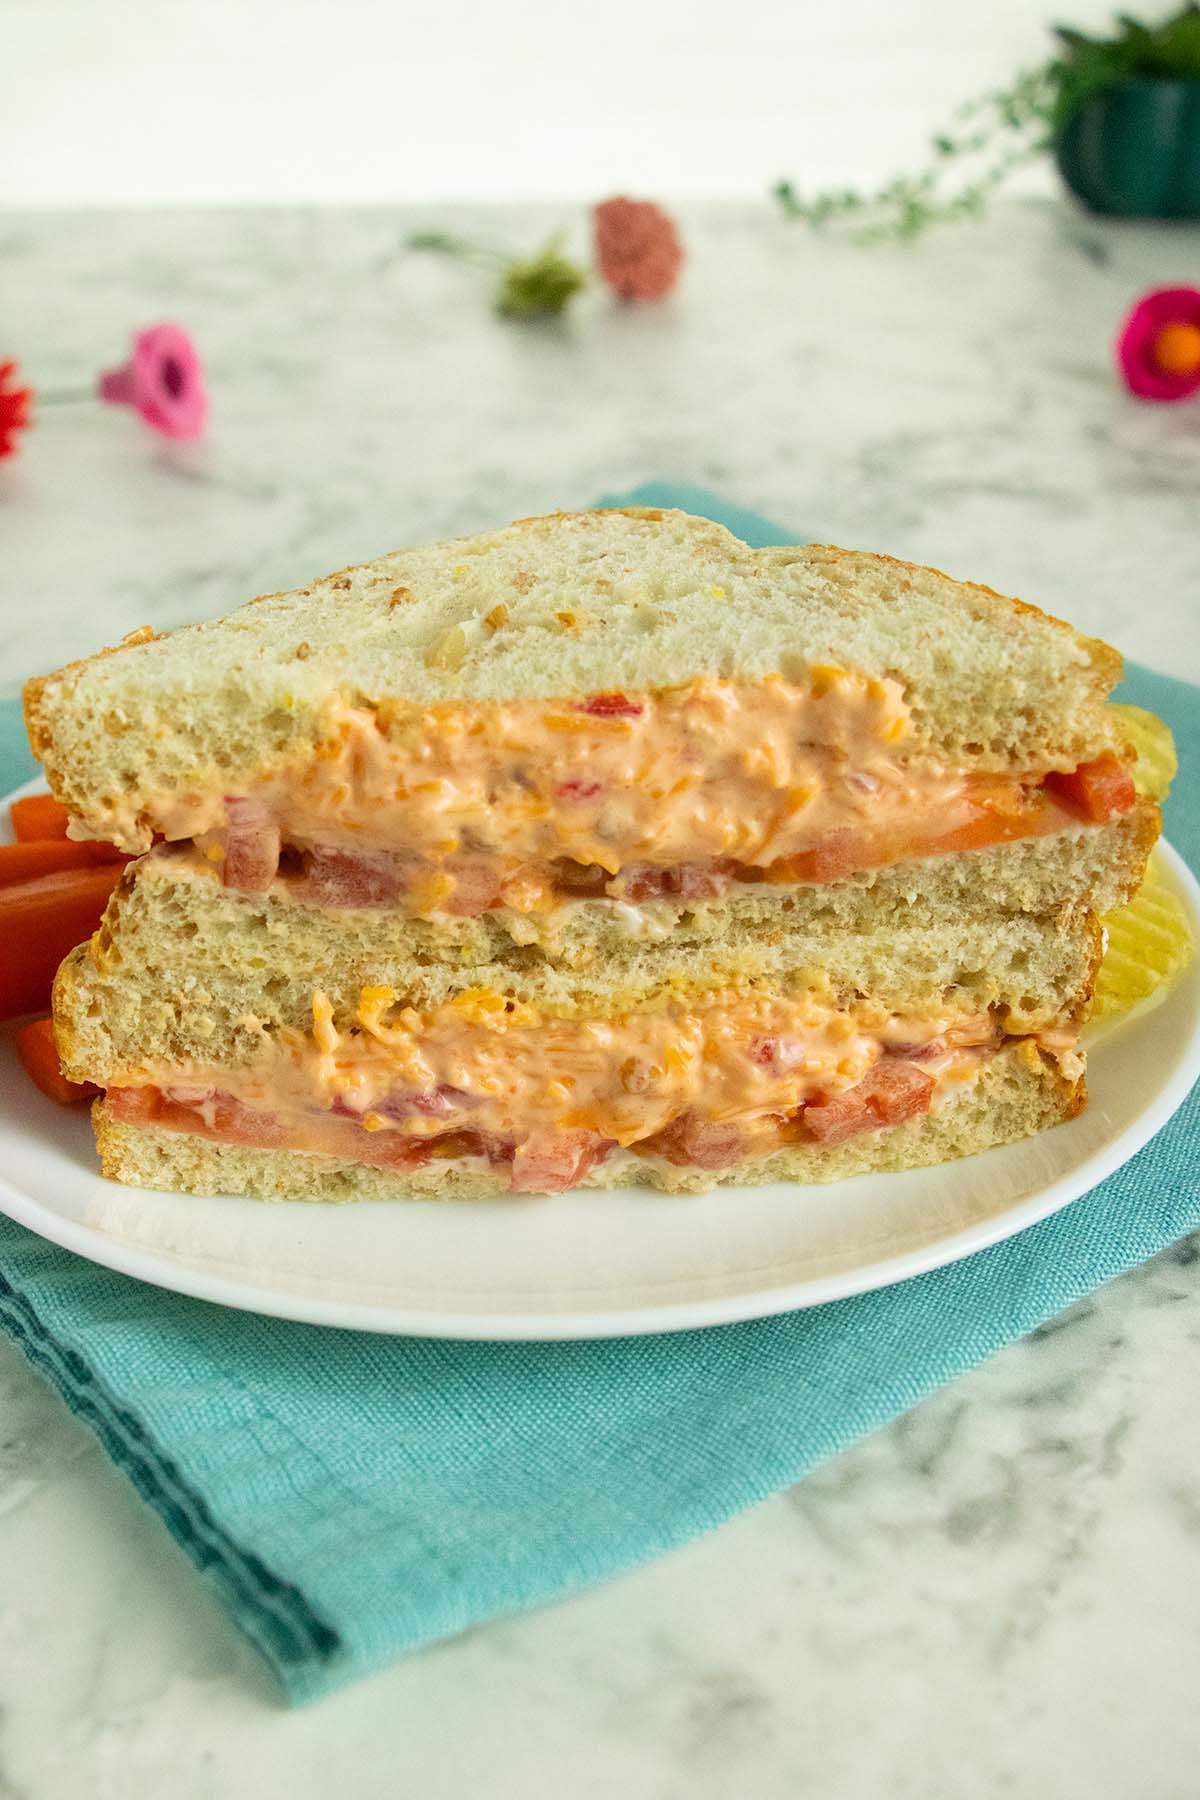 vegan tomato sandwich with pimento cheese on a white table with flowers in the background